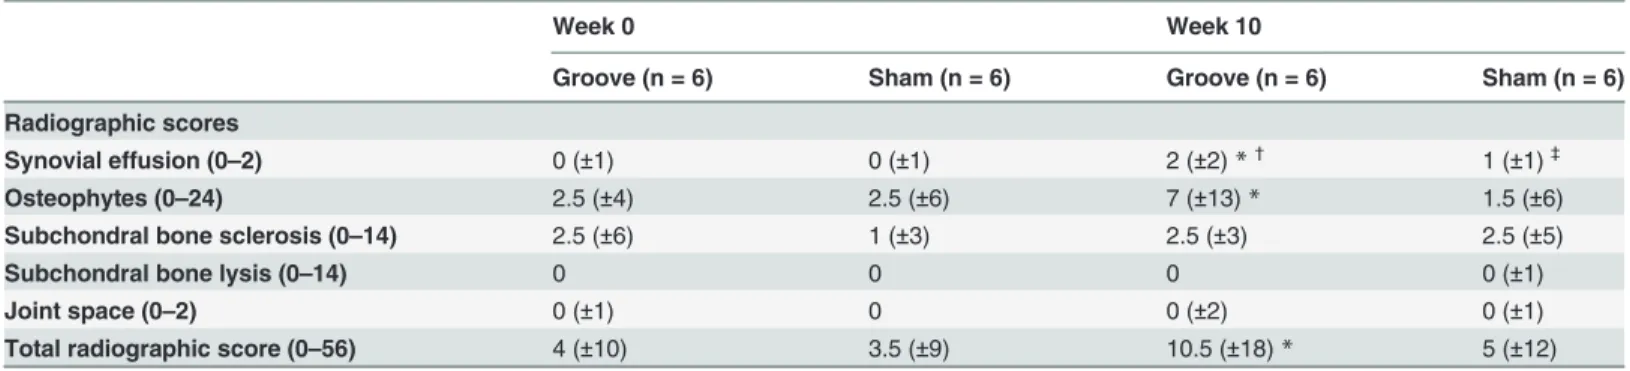 Table 1. Median radiographic scores (± median absolute deviation) for groove and sham joints at weeks 0 and 10.